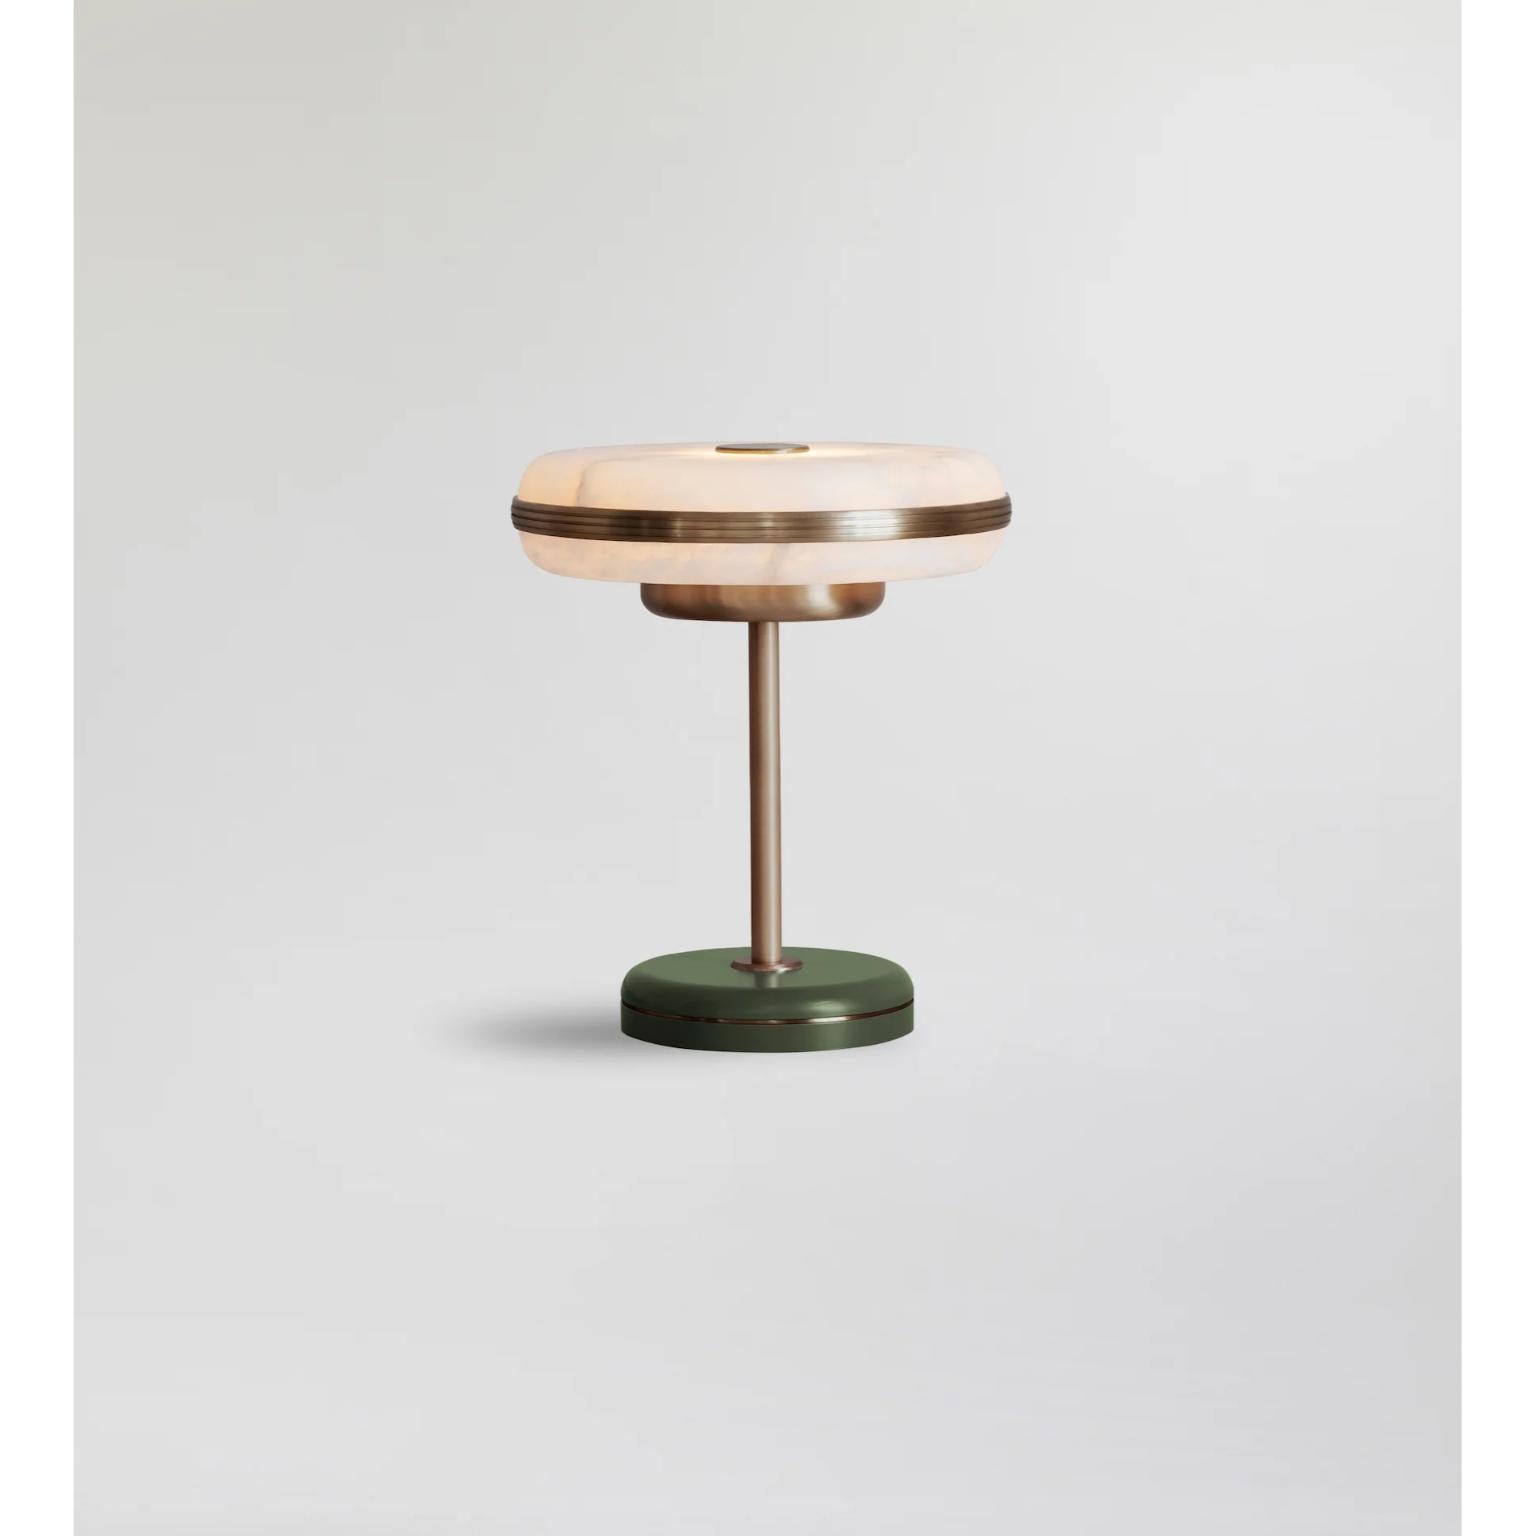 Beran Antique Brass Small Table Lamp by Bert Frank
Dimensions: Ø 26 x H 28 cm.
Materials: Brass and alabaster.
Base finish: Olive.

Available in two different sizes. Available in different finishes and materials. Please contact us. 

The natural